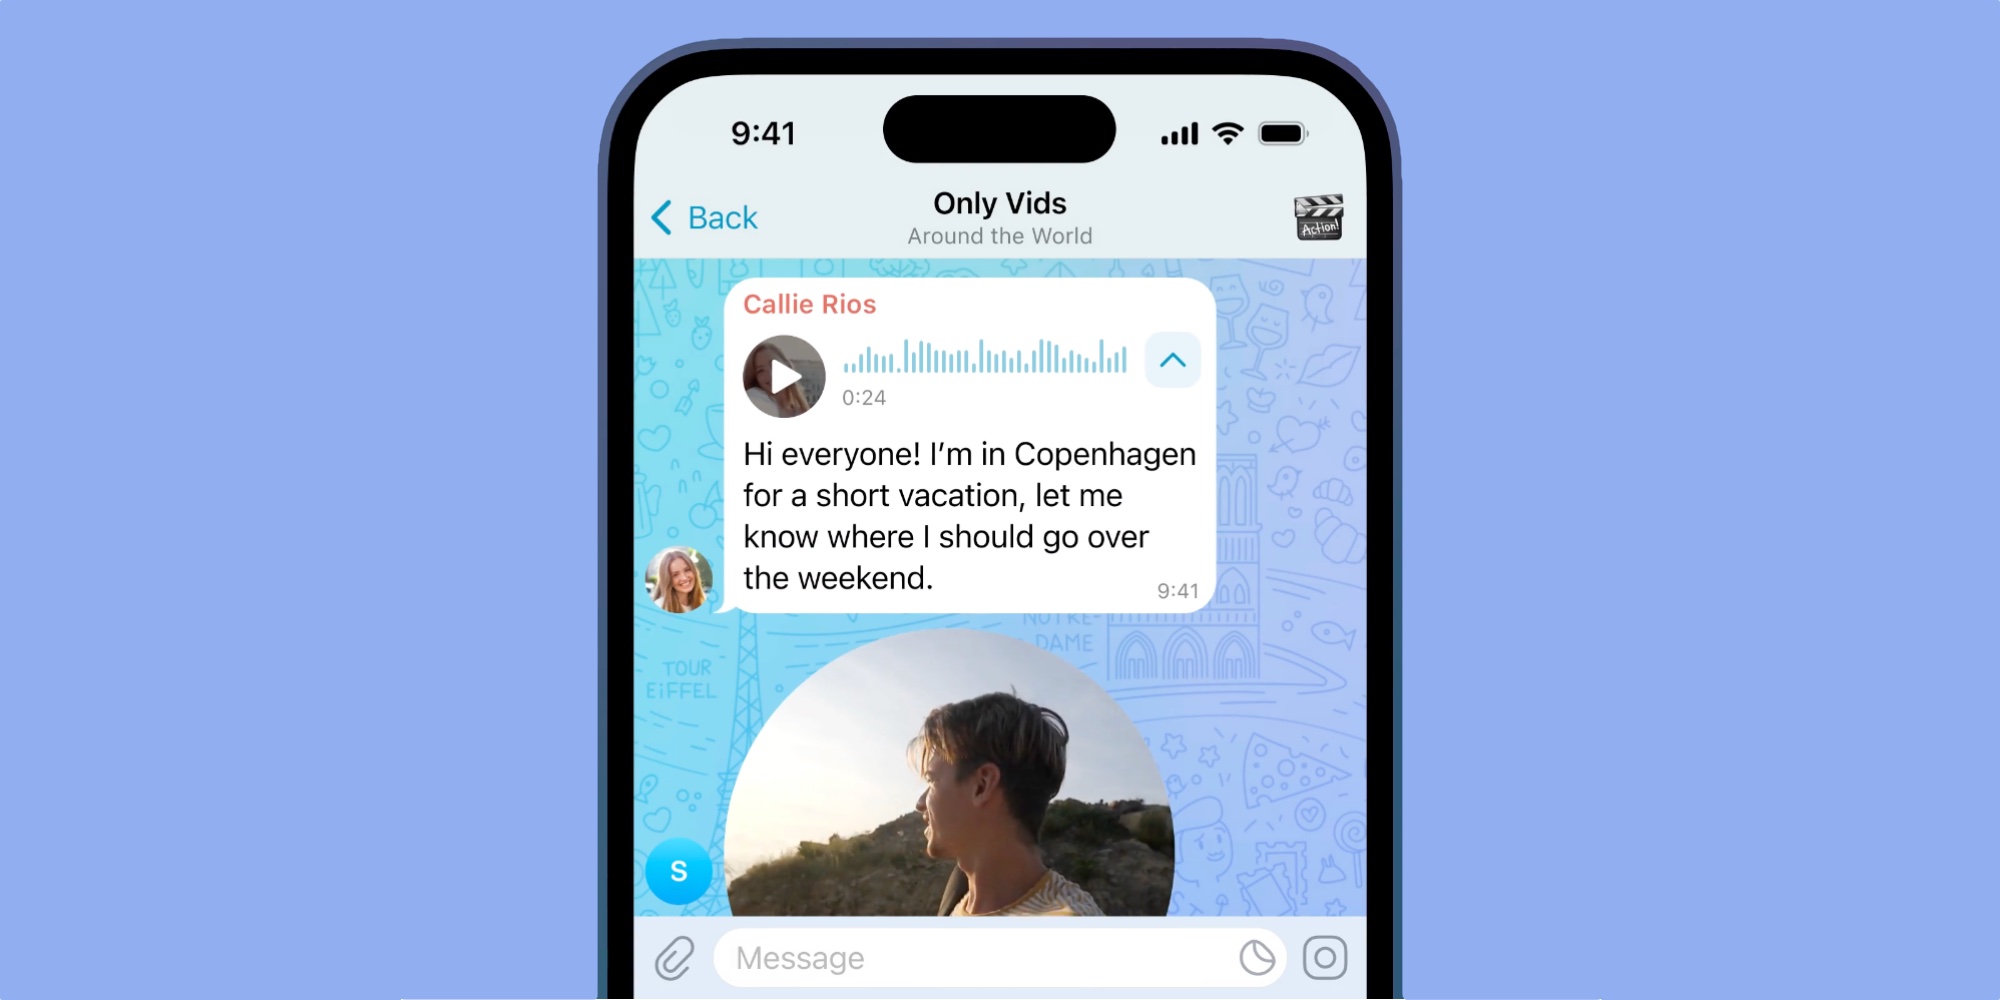 Telegram announces first update of the year with entire chat translation, profile photo maker feature, and more